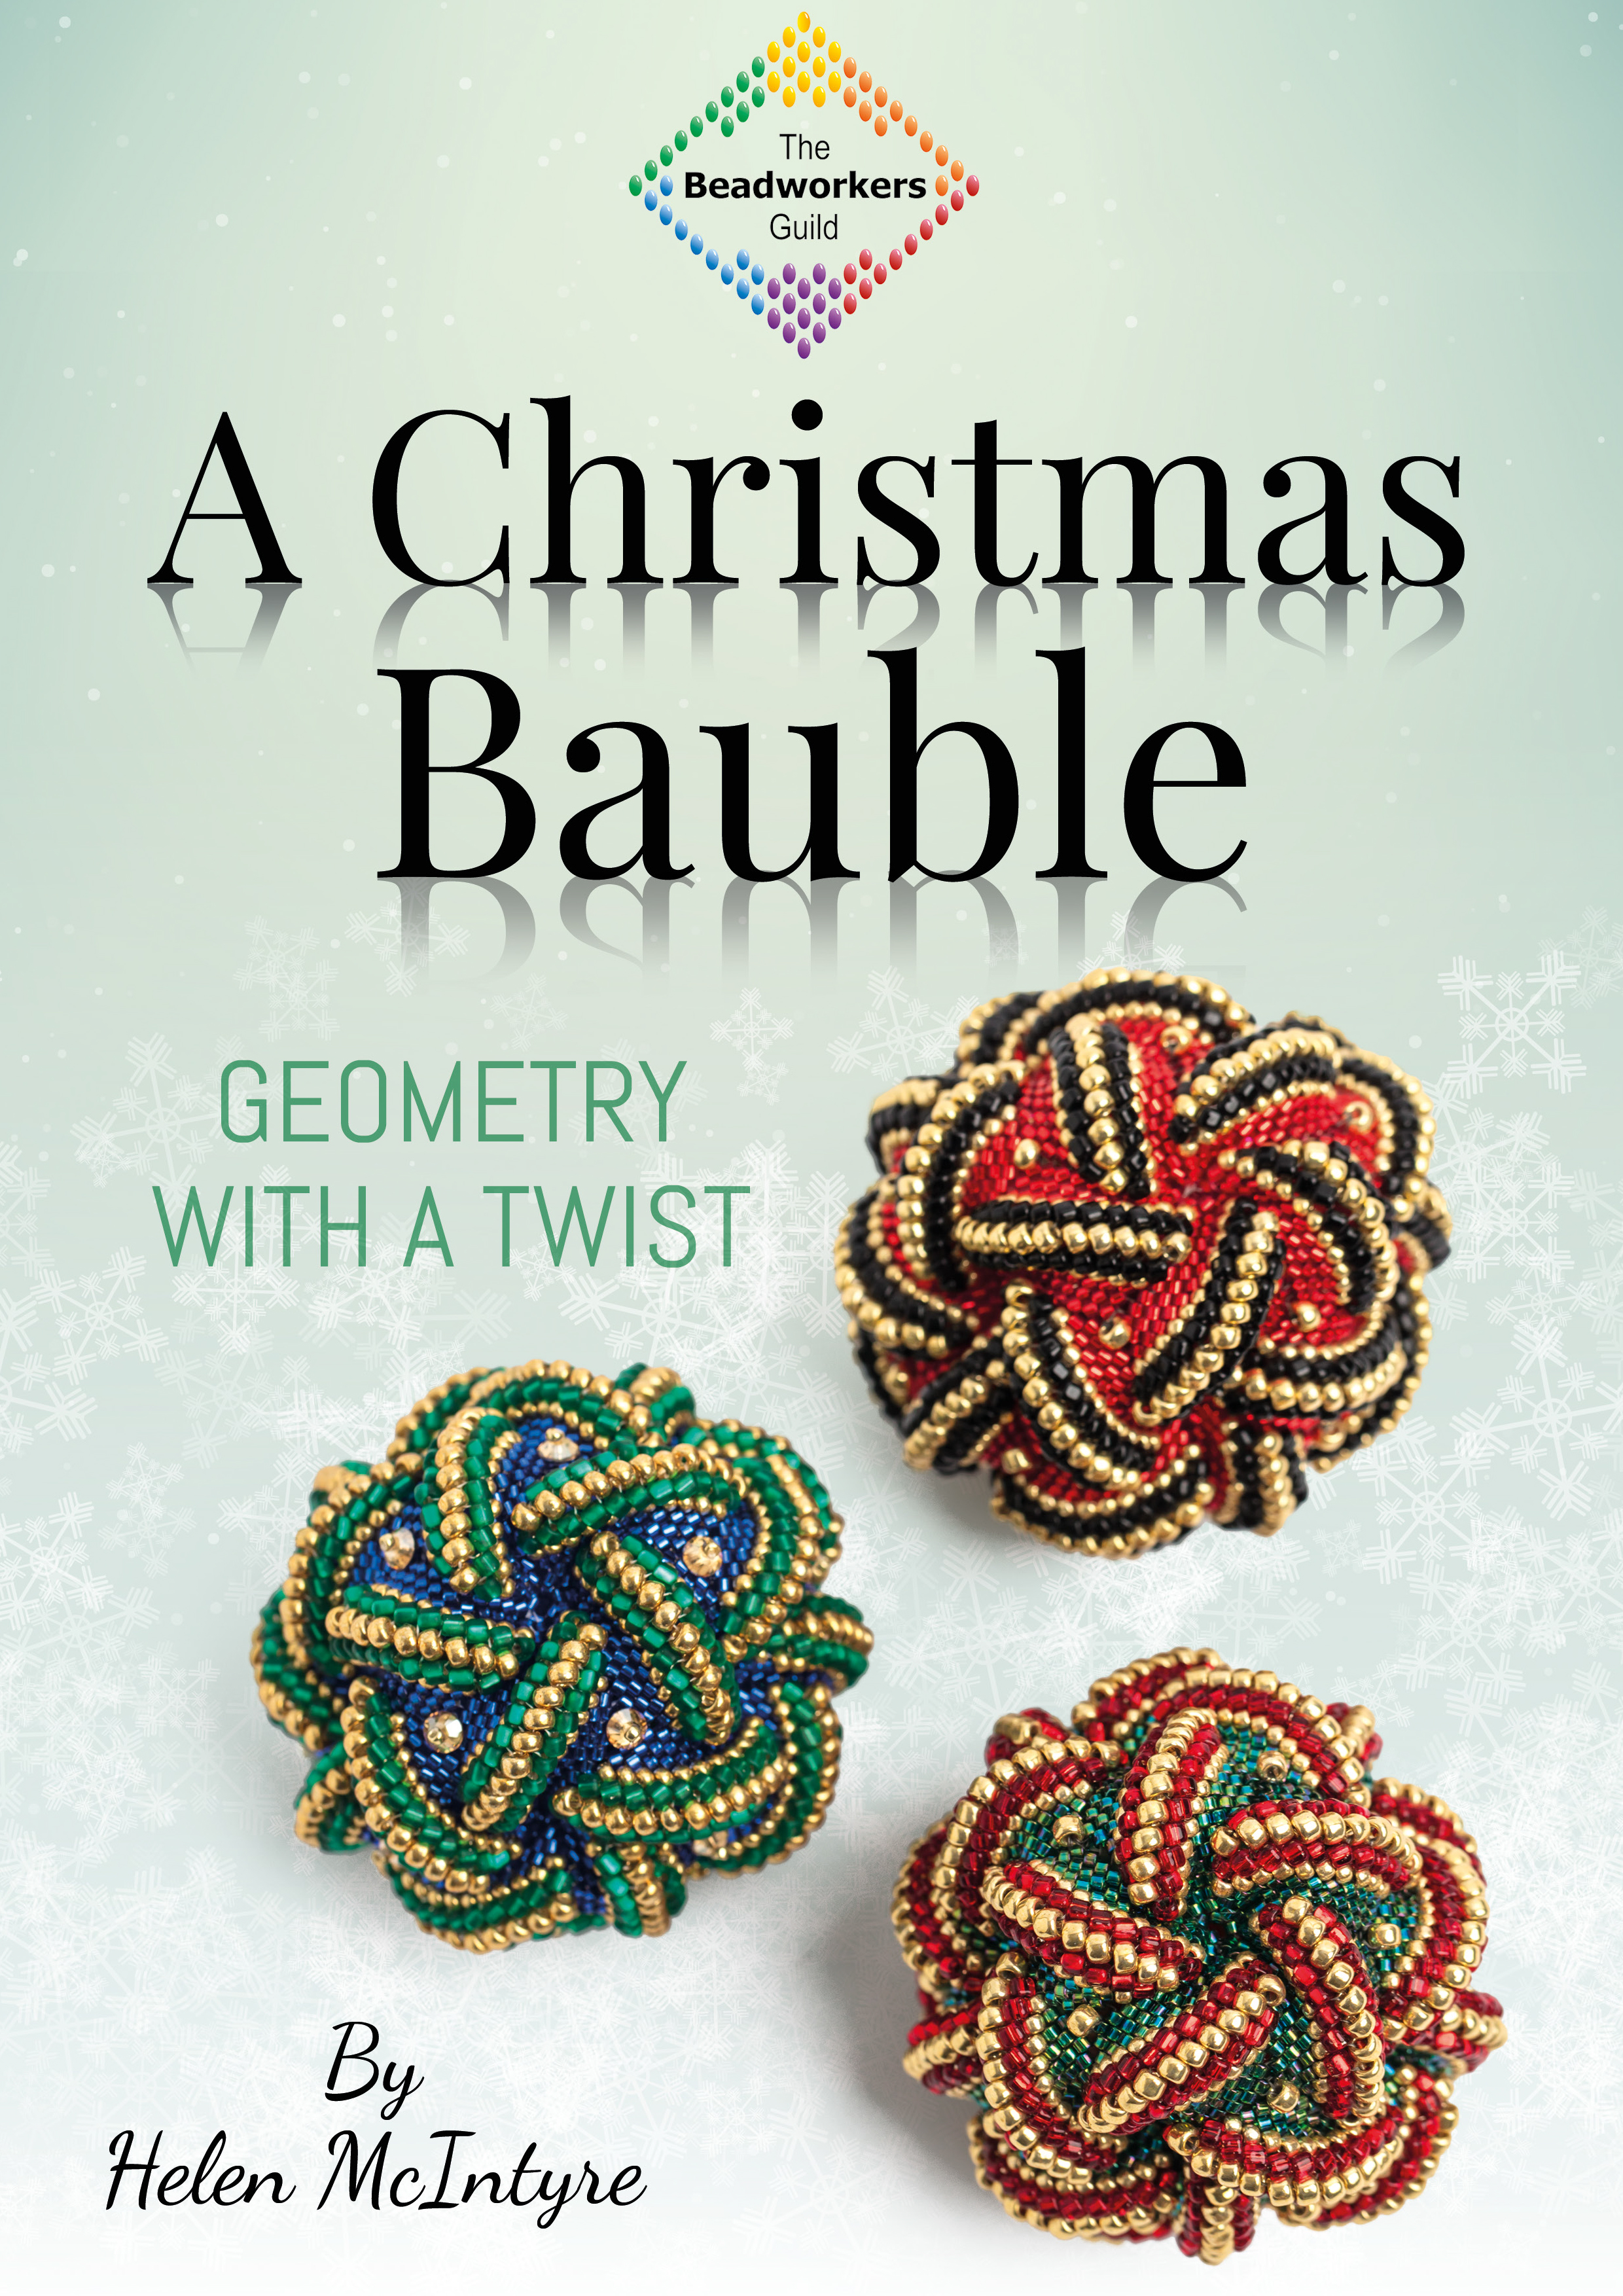 Picture for product A Christmas Bauble - Geometry with a twist